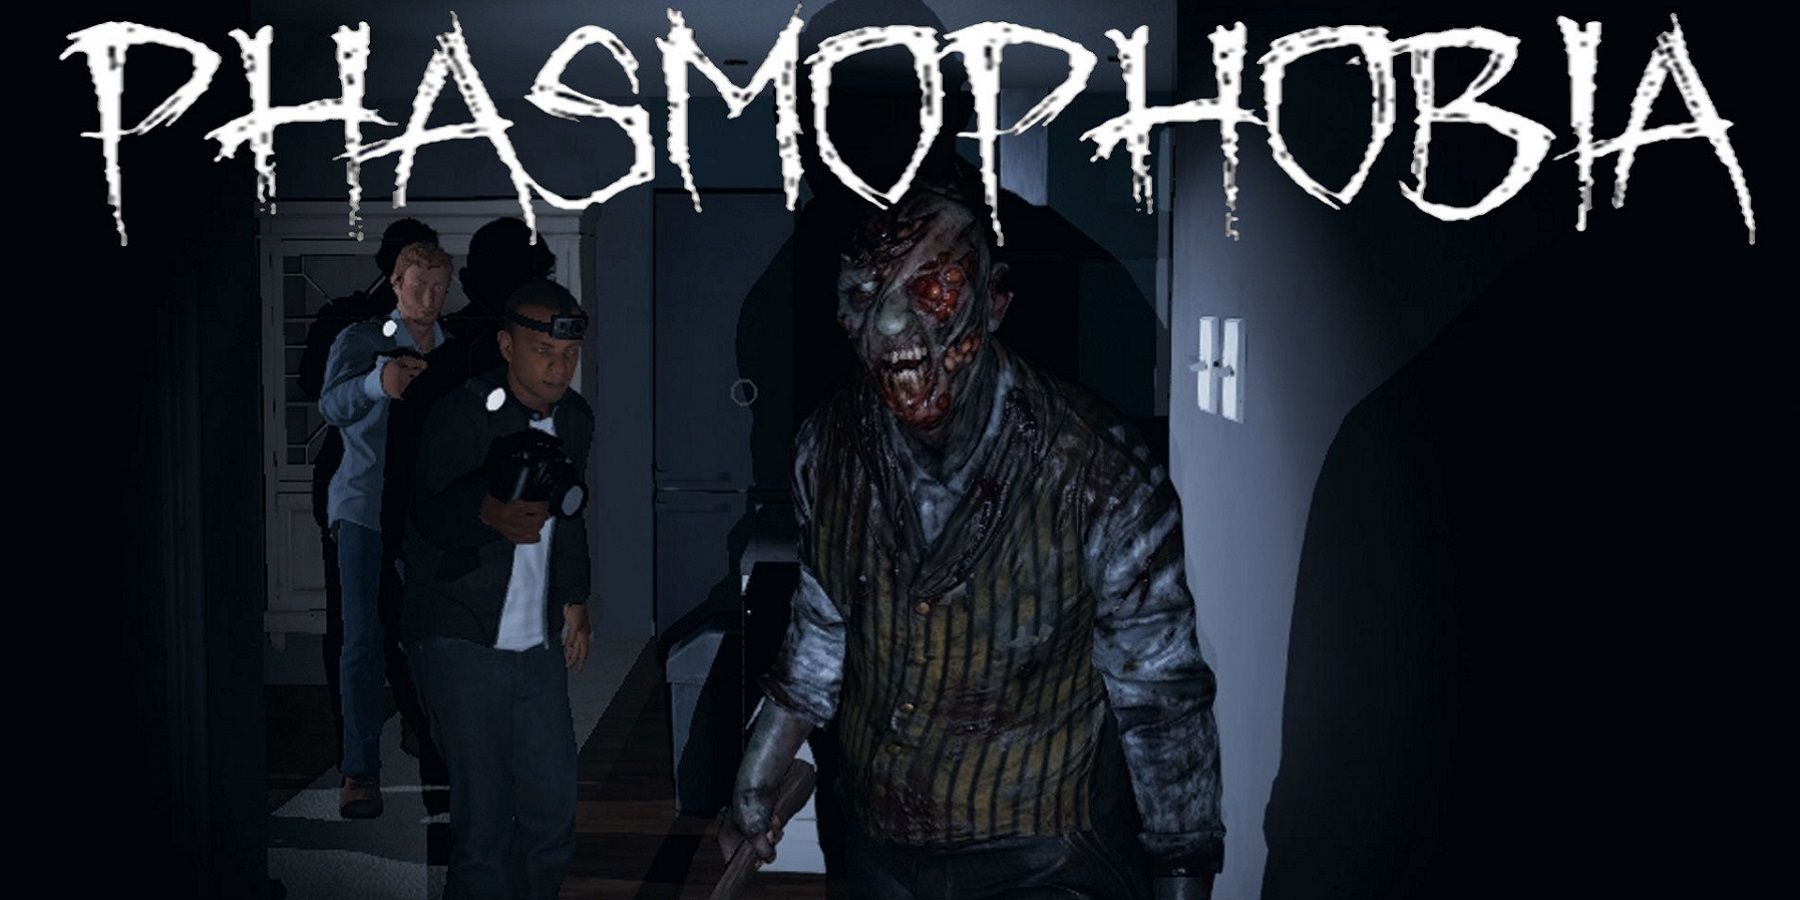 Screenshot from Phasmophobia showing the game's logo as two people approach a creepy-looking figure.